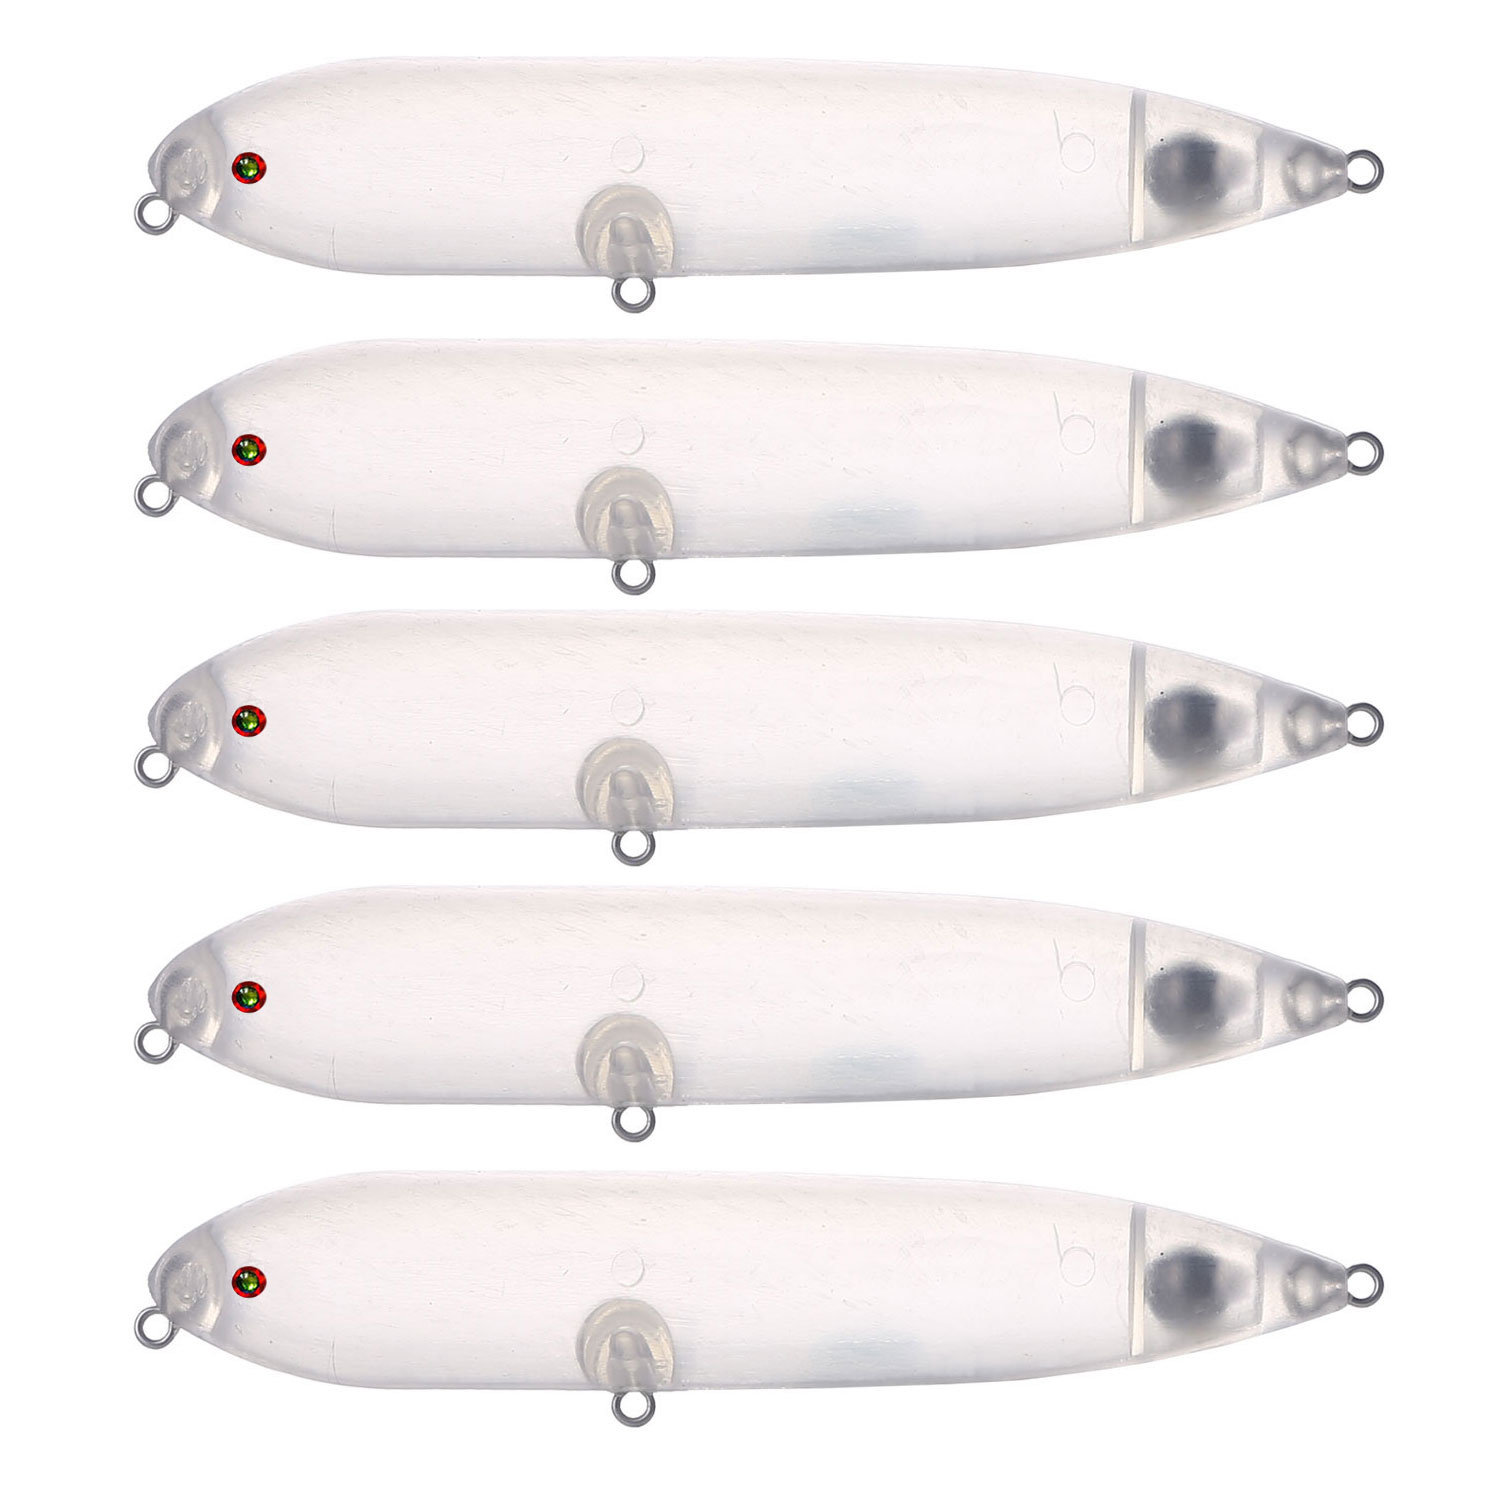 Unpainted Lures/Baits – FREE FISHER